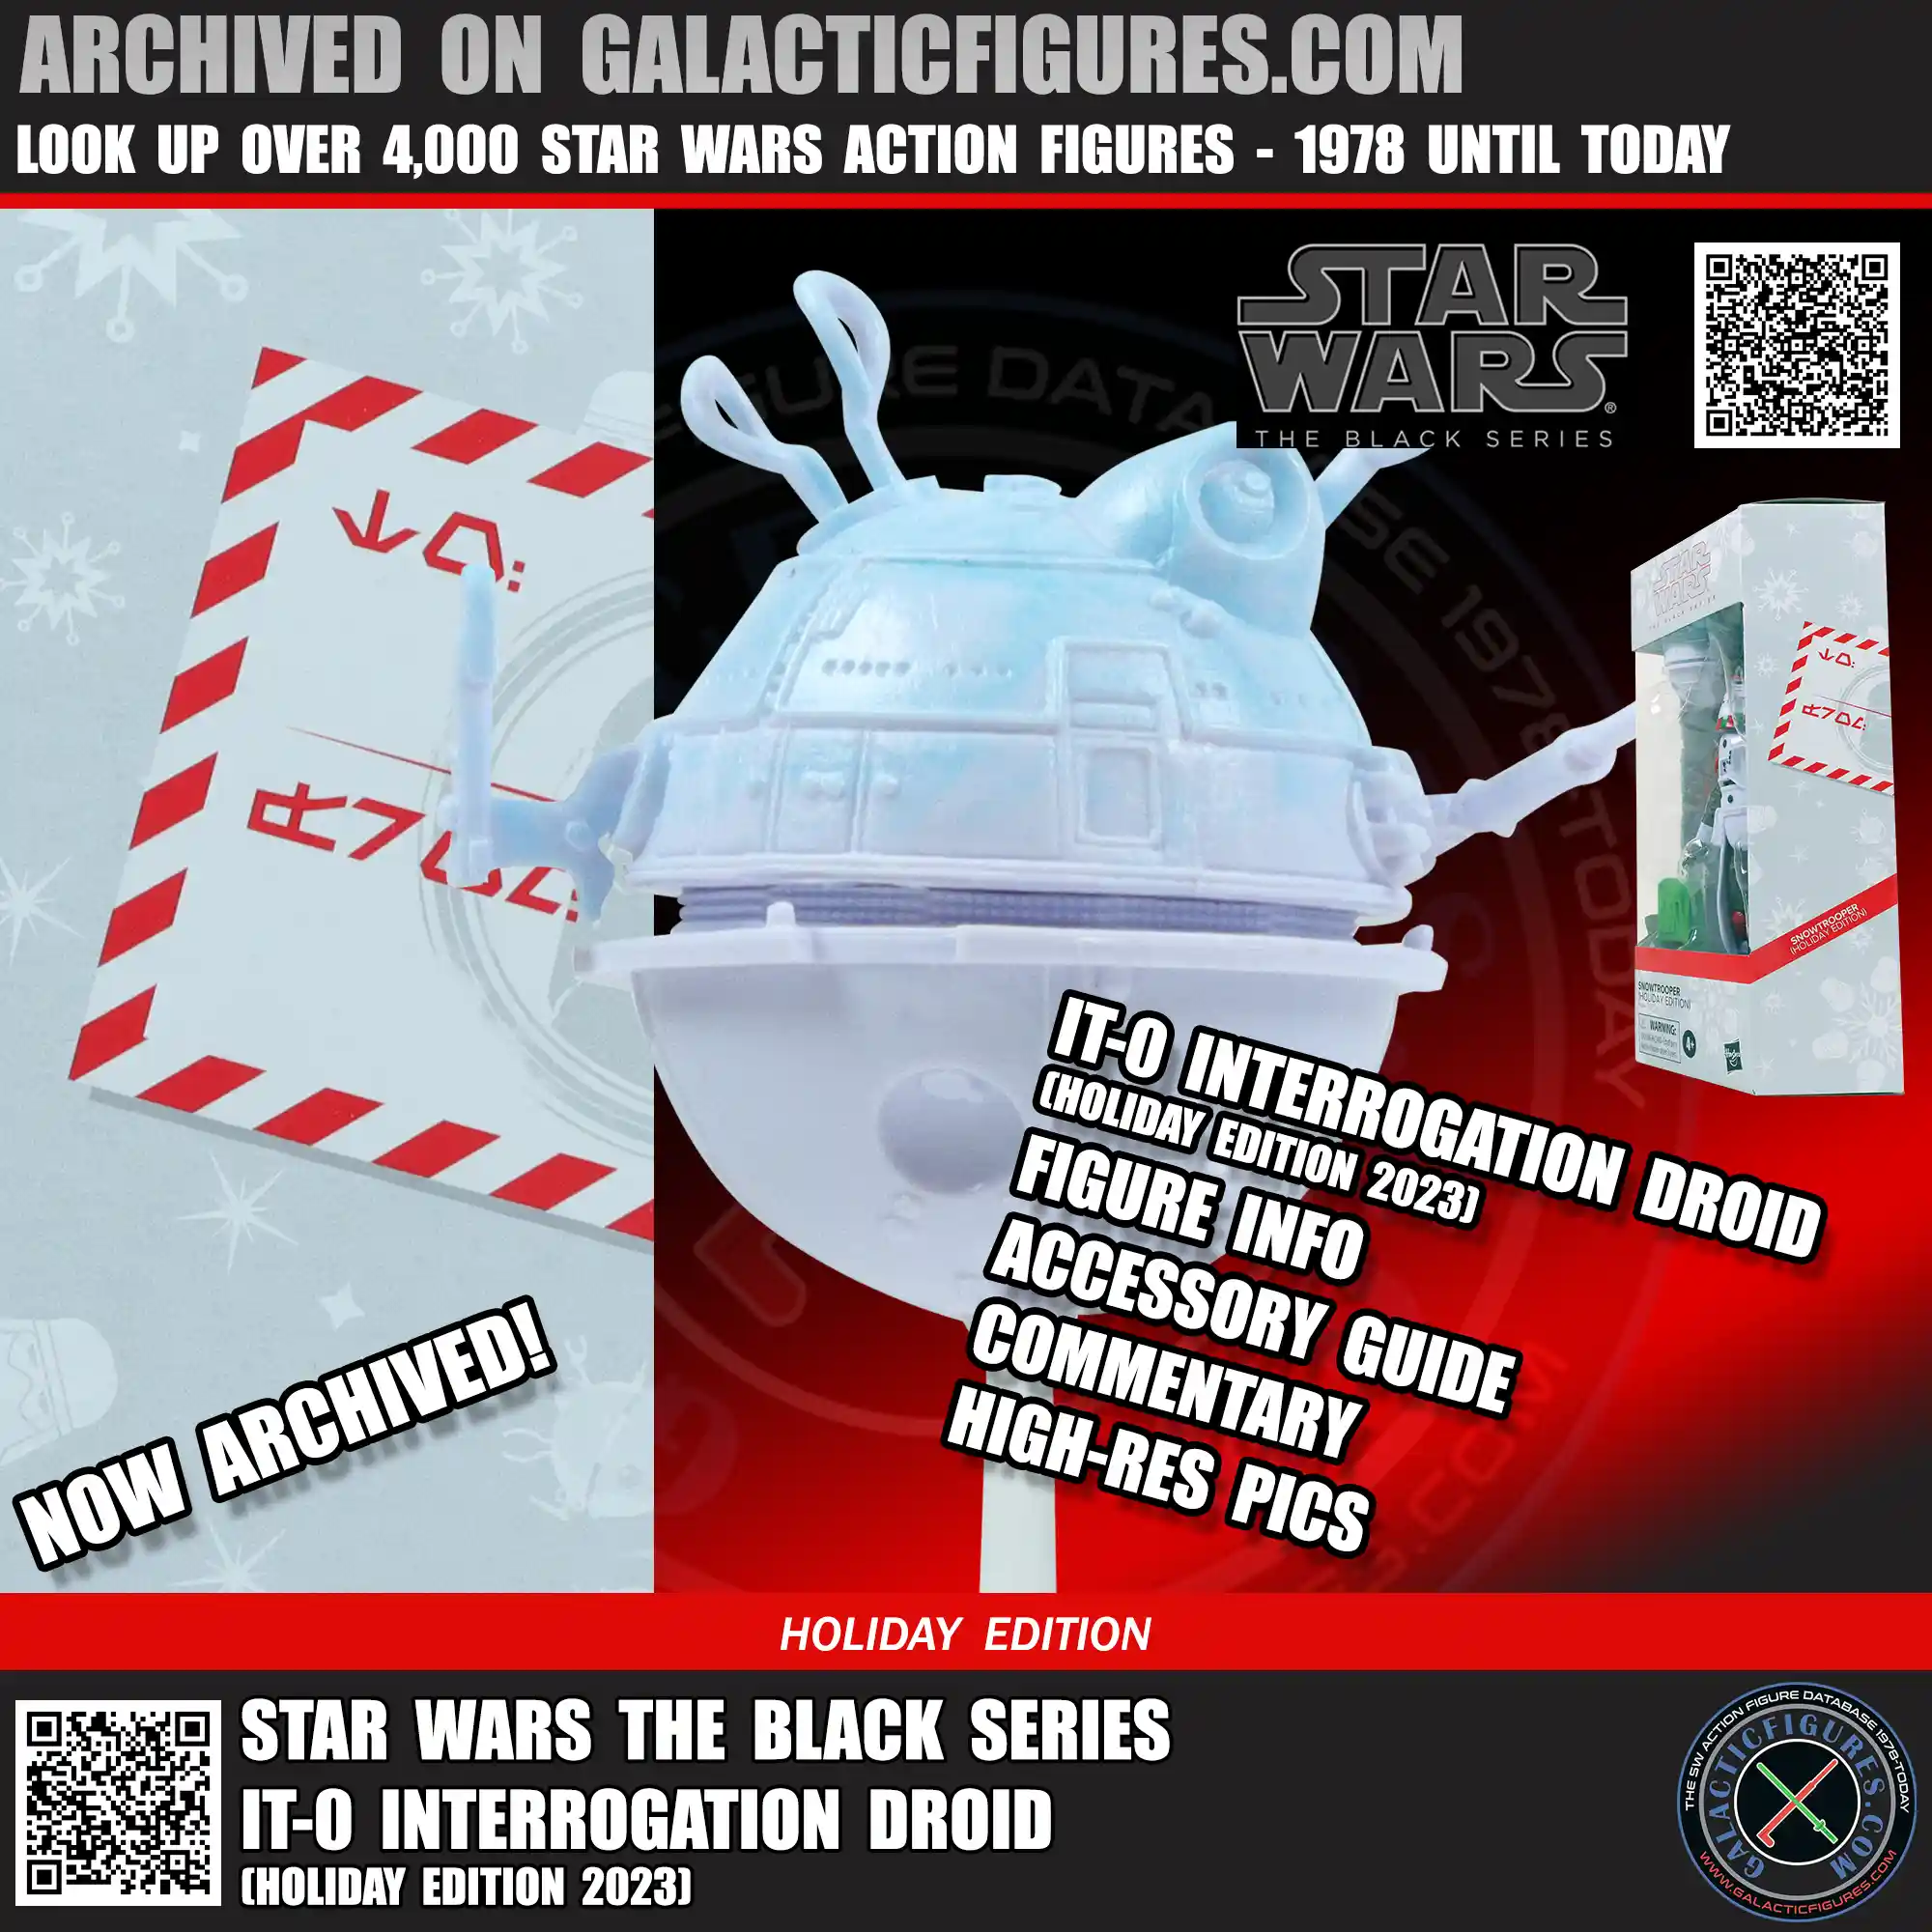 Black Series IT-0 Interrogation Droid (Holiay Edition 2023) Added